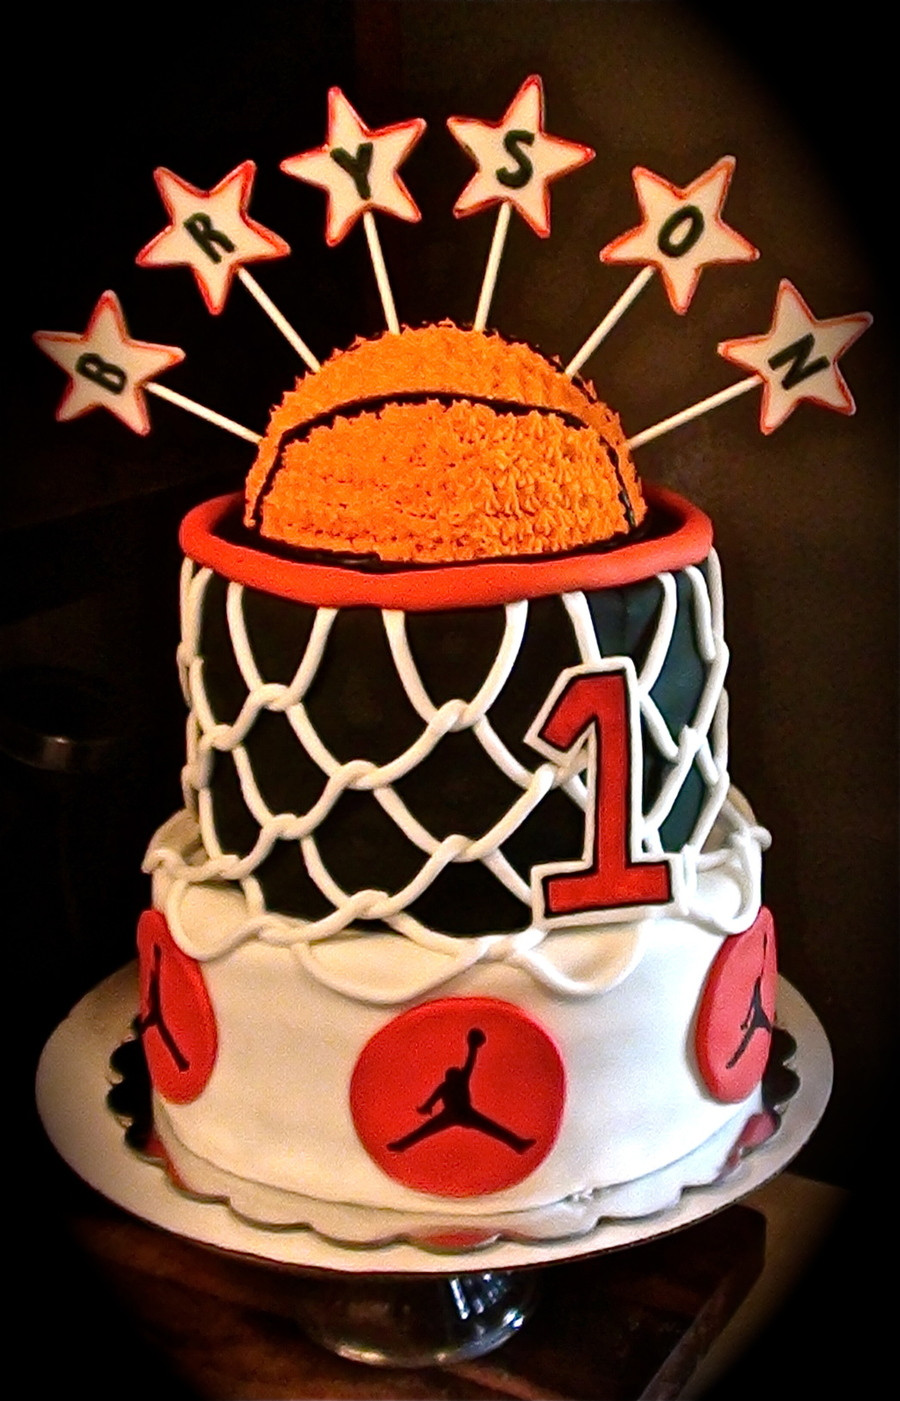 Basketball Birthday Cake
 Friday Night Cake Club For 10 30 15 CakeCentral